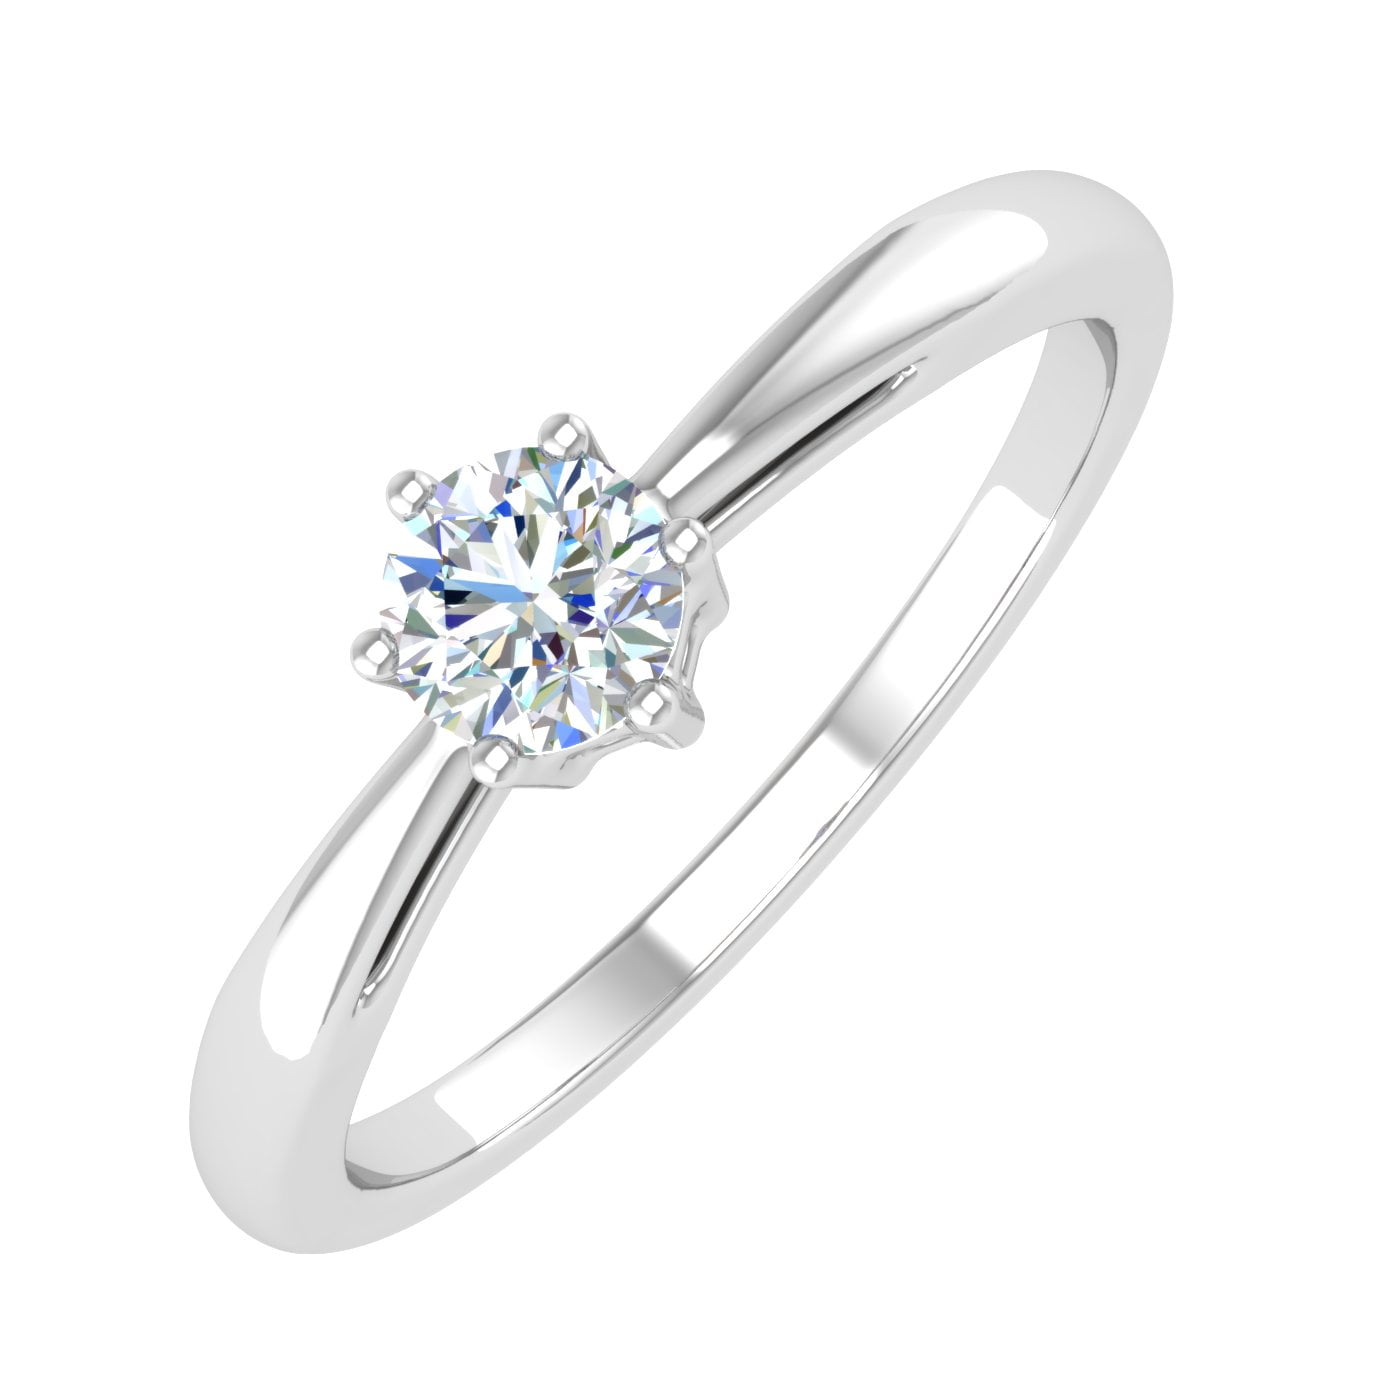 Carat 6-Prong Set Diamond Solitaire Engagement Ring Band in 10K White Gold Size 7) - Walmart.com